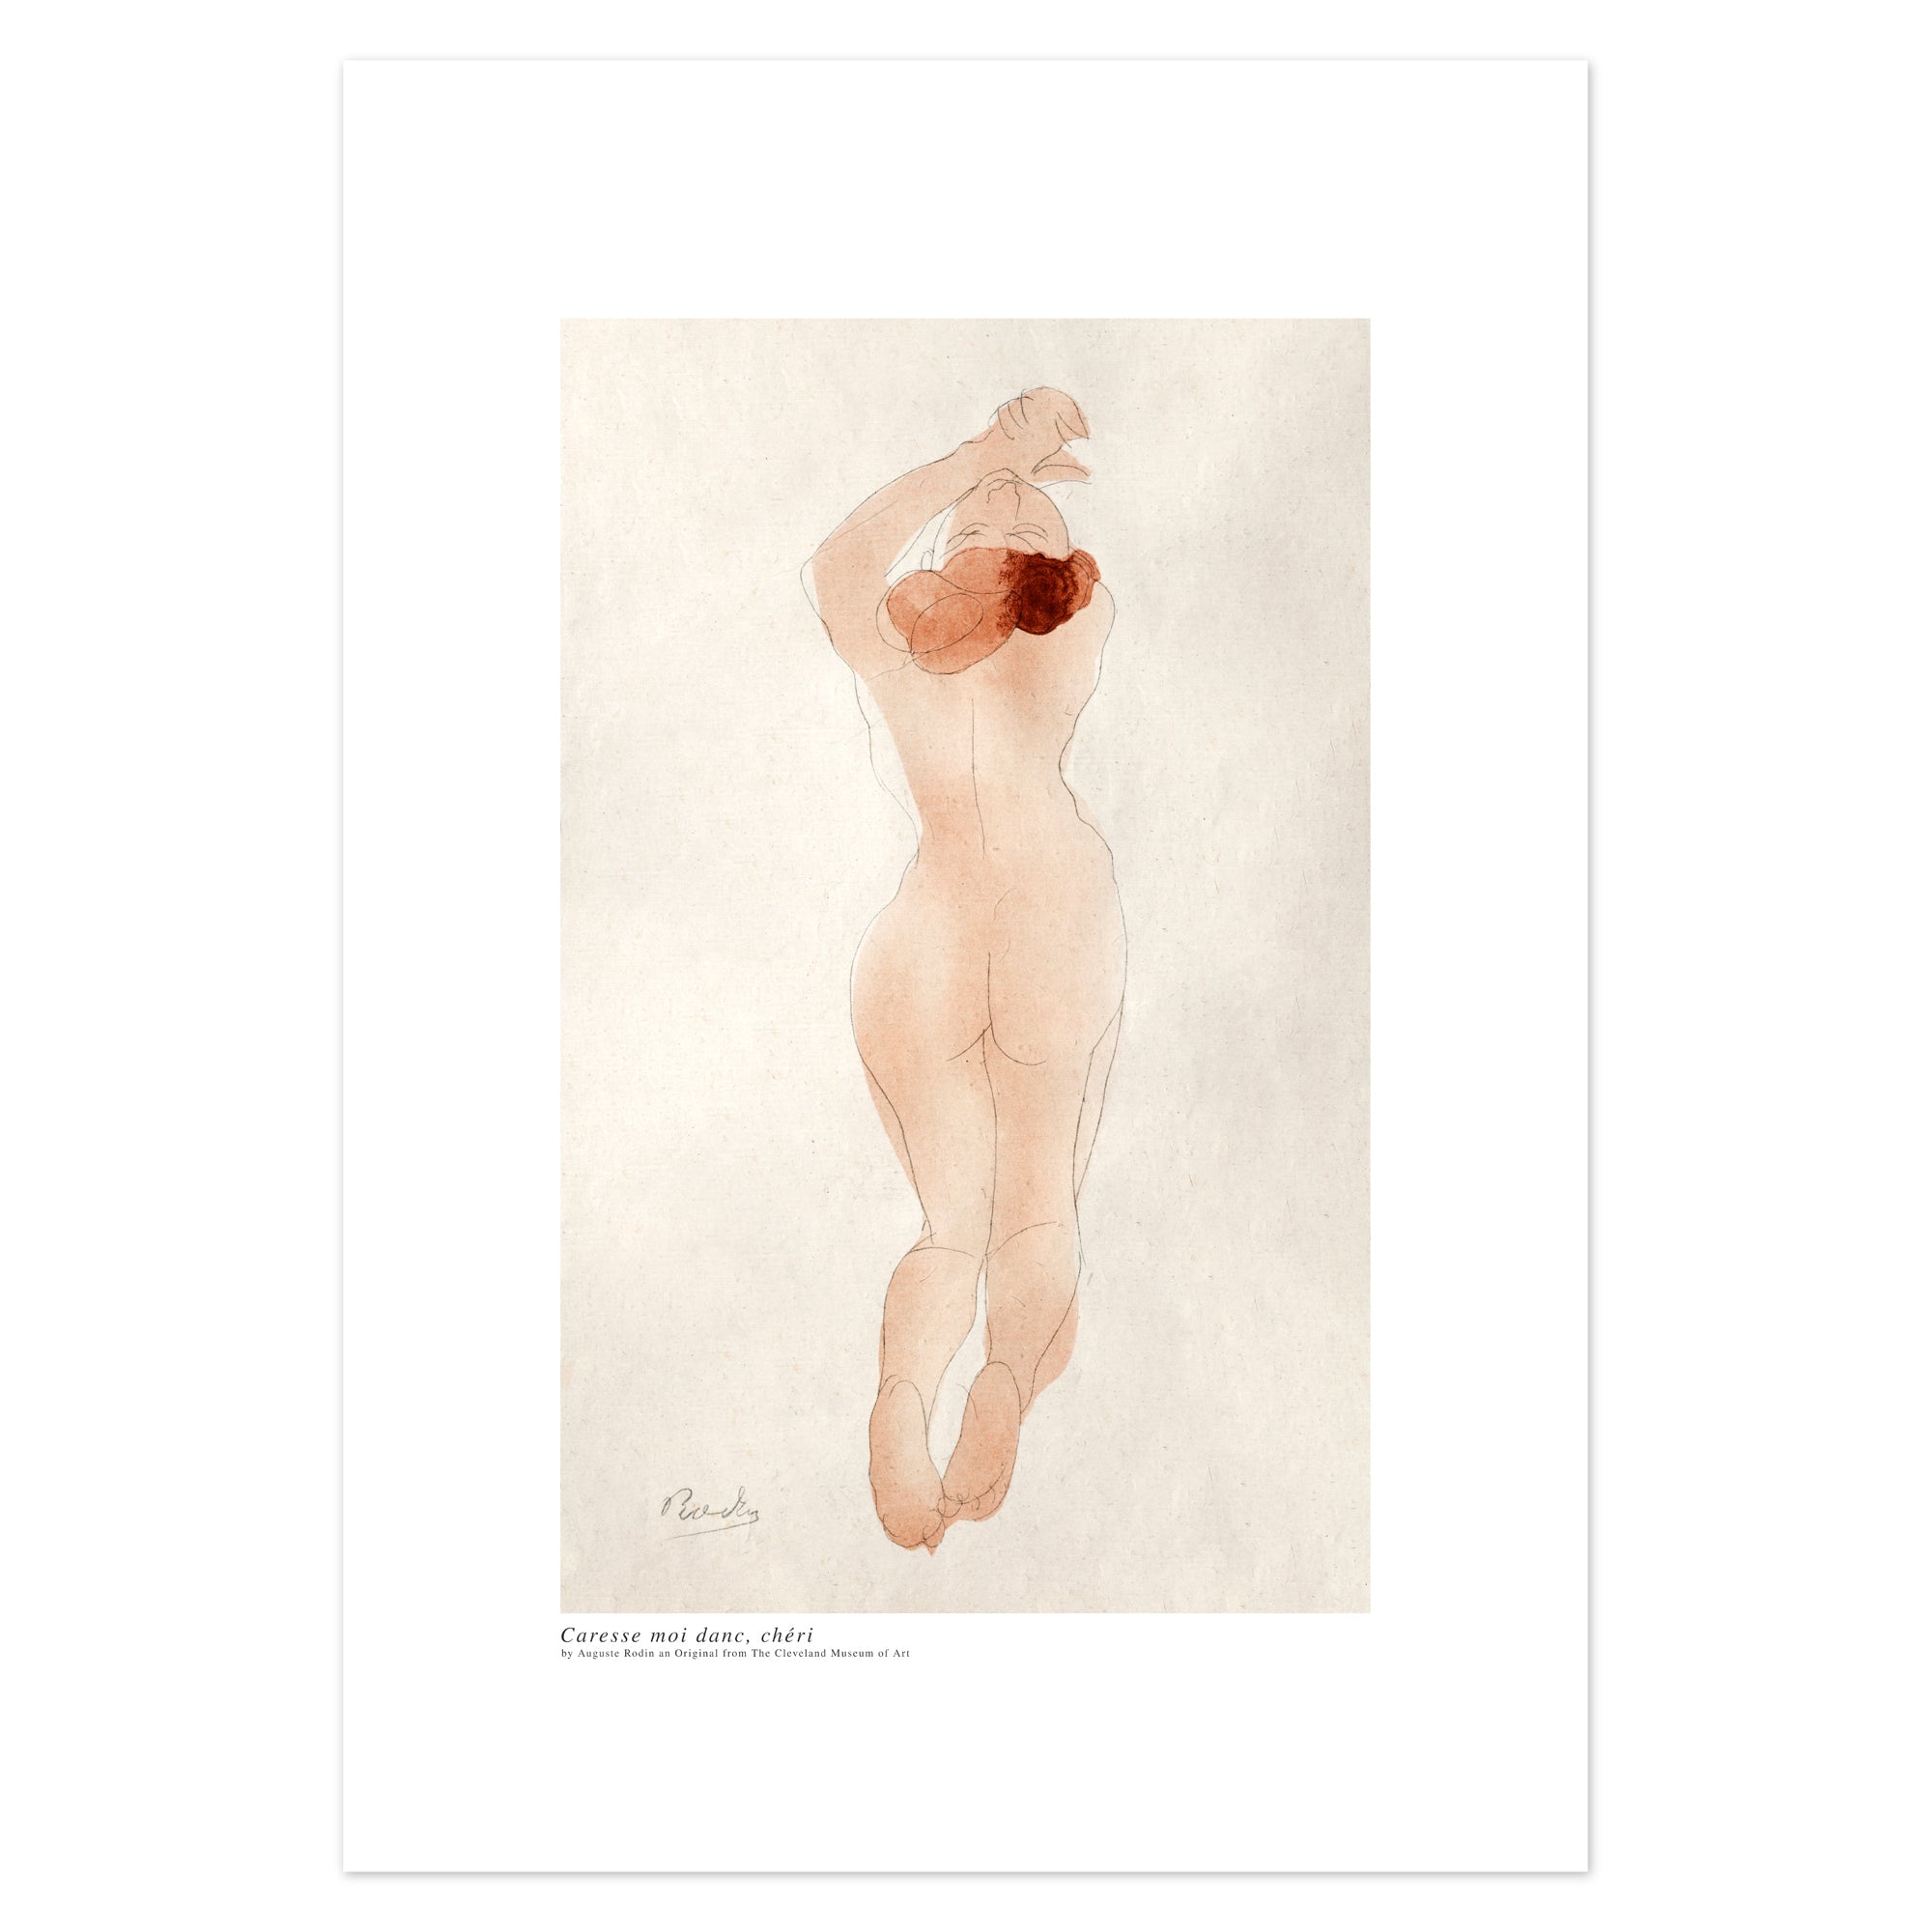 Poster. Watercolor nude study by Auguste Rodin